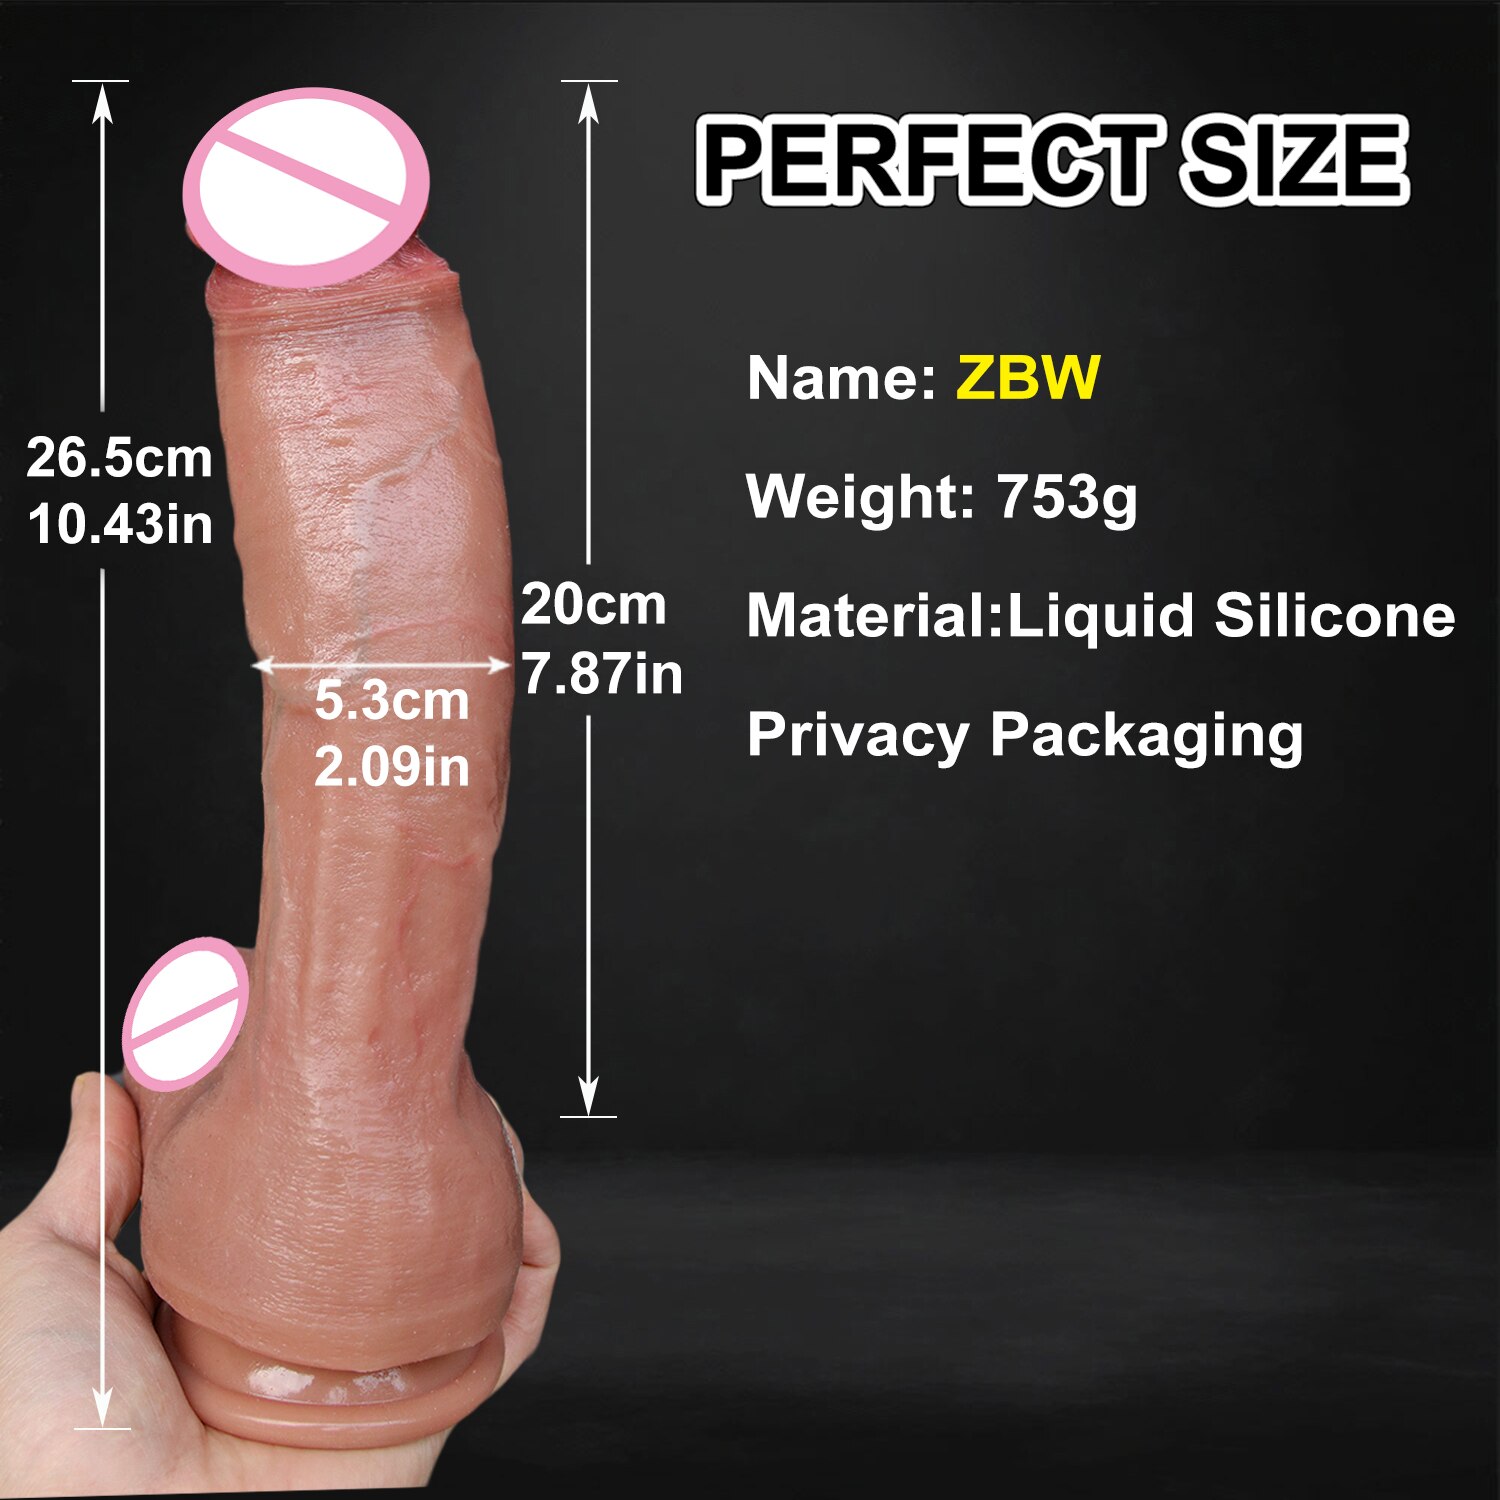 12.6in Soft Realistic Thick Huge Dildo Powerful Suction Cup Penis Strap on Masturbators Dick Butt Plug Adult Toys for Men Women